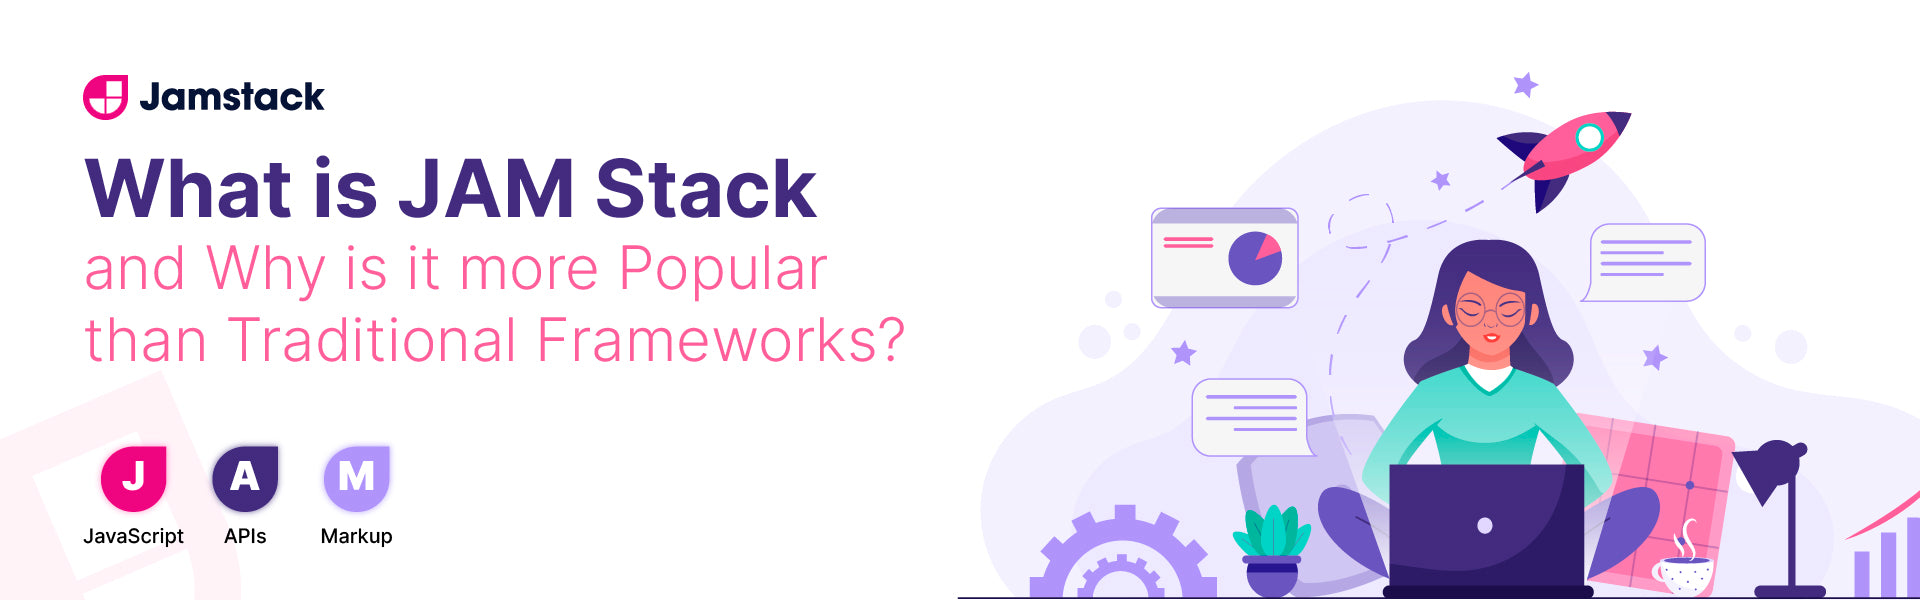 What is JAM Stack and Why is it more Popular than Traditional Frameworks?